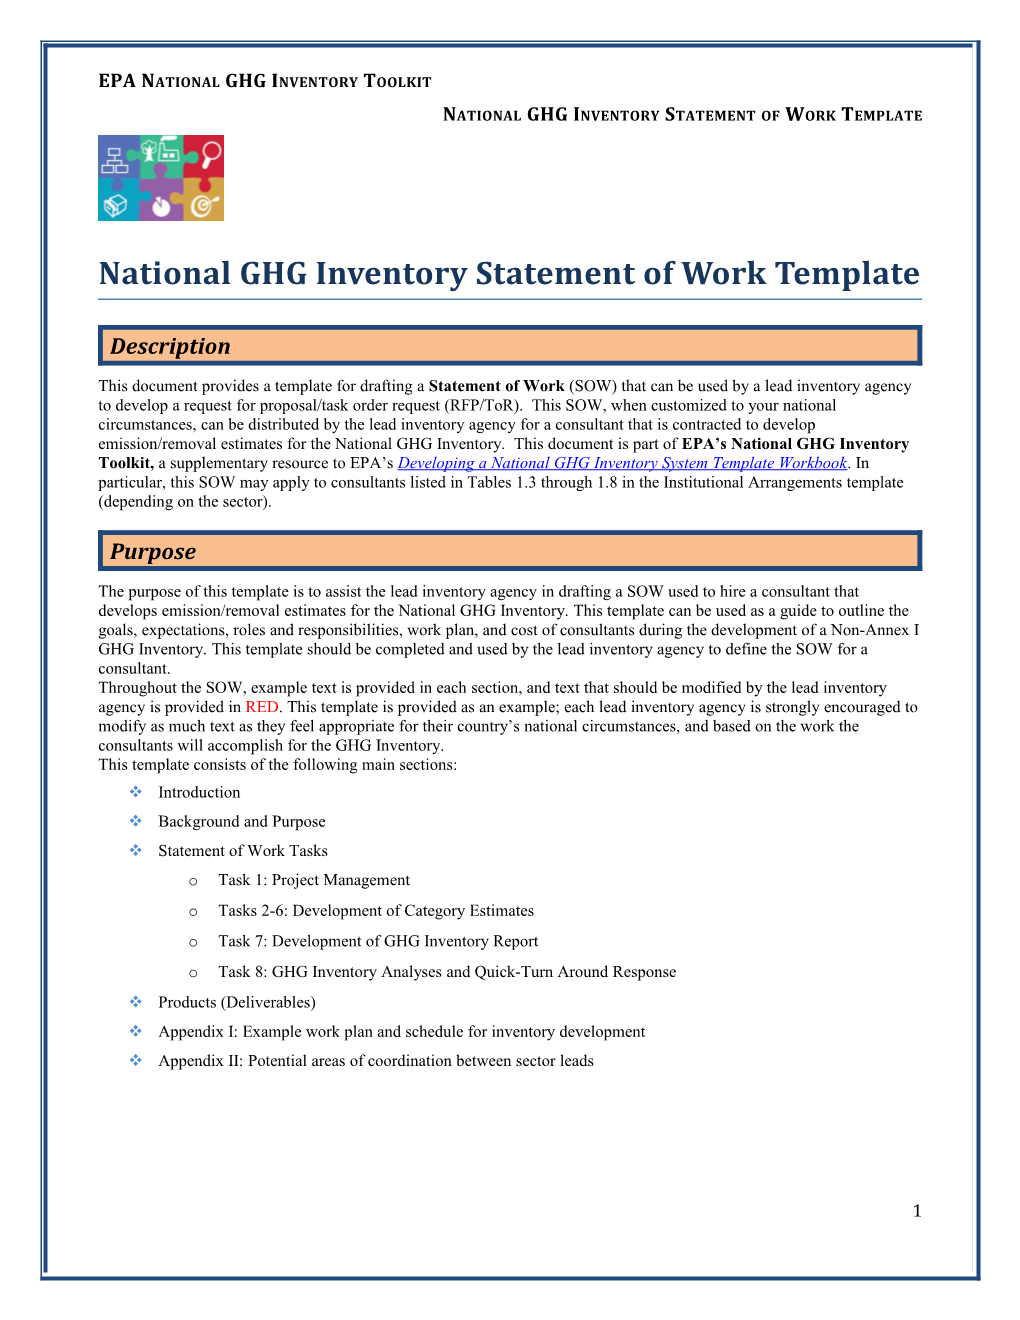 National GHG Inventory Statement of Work Template